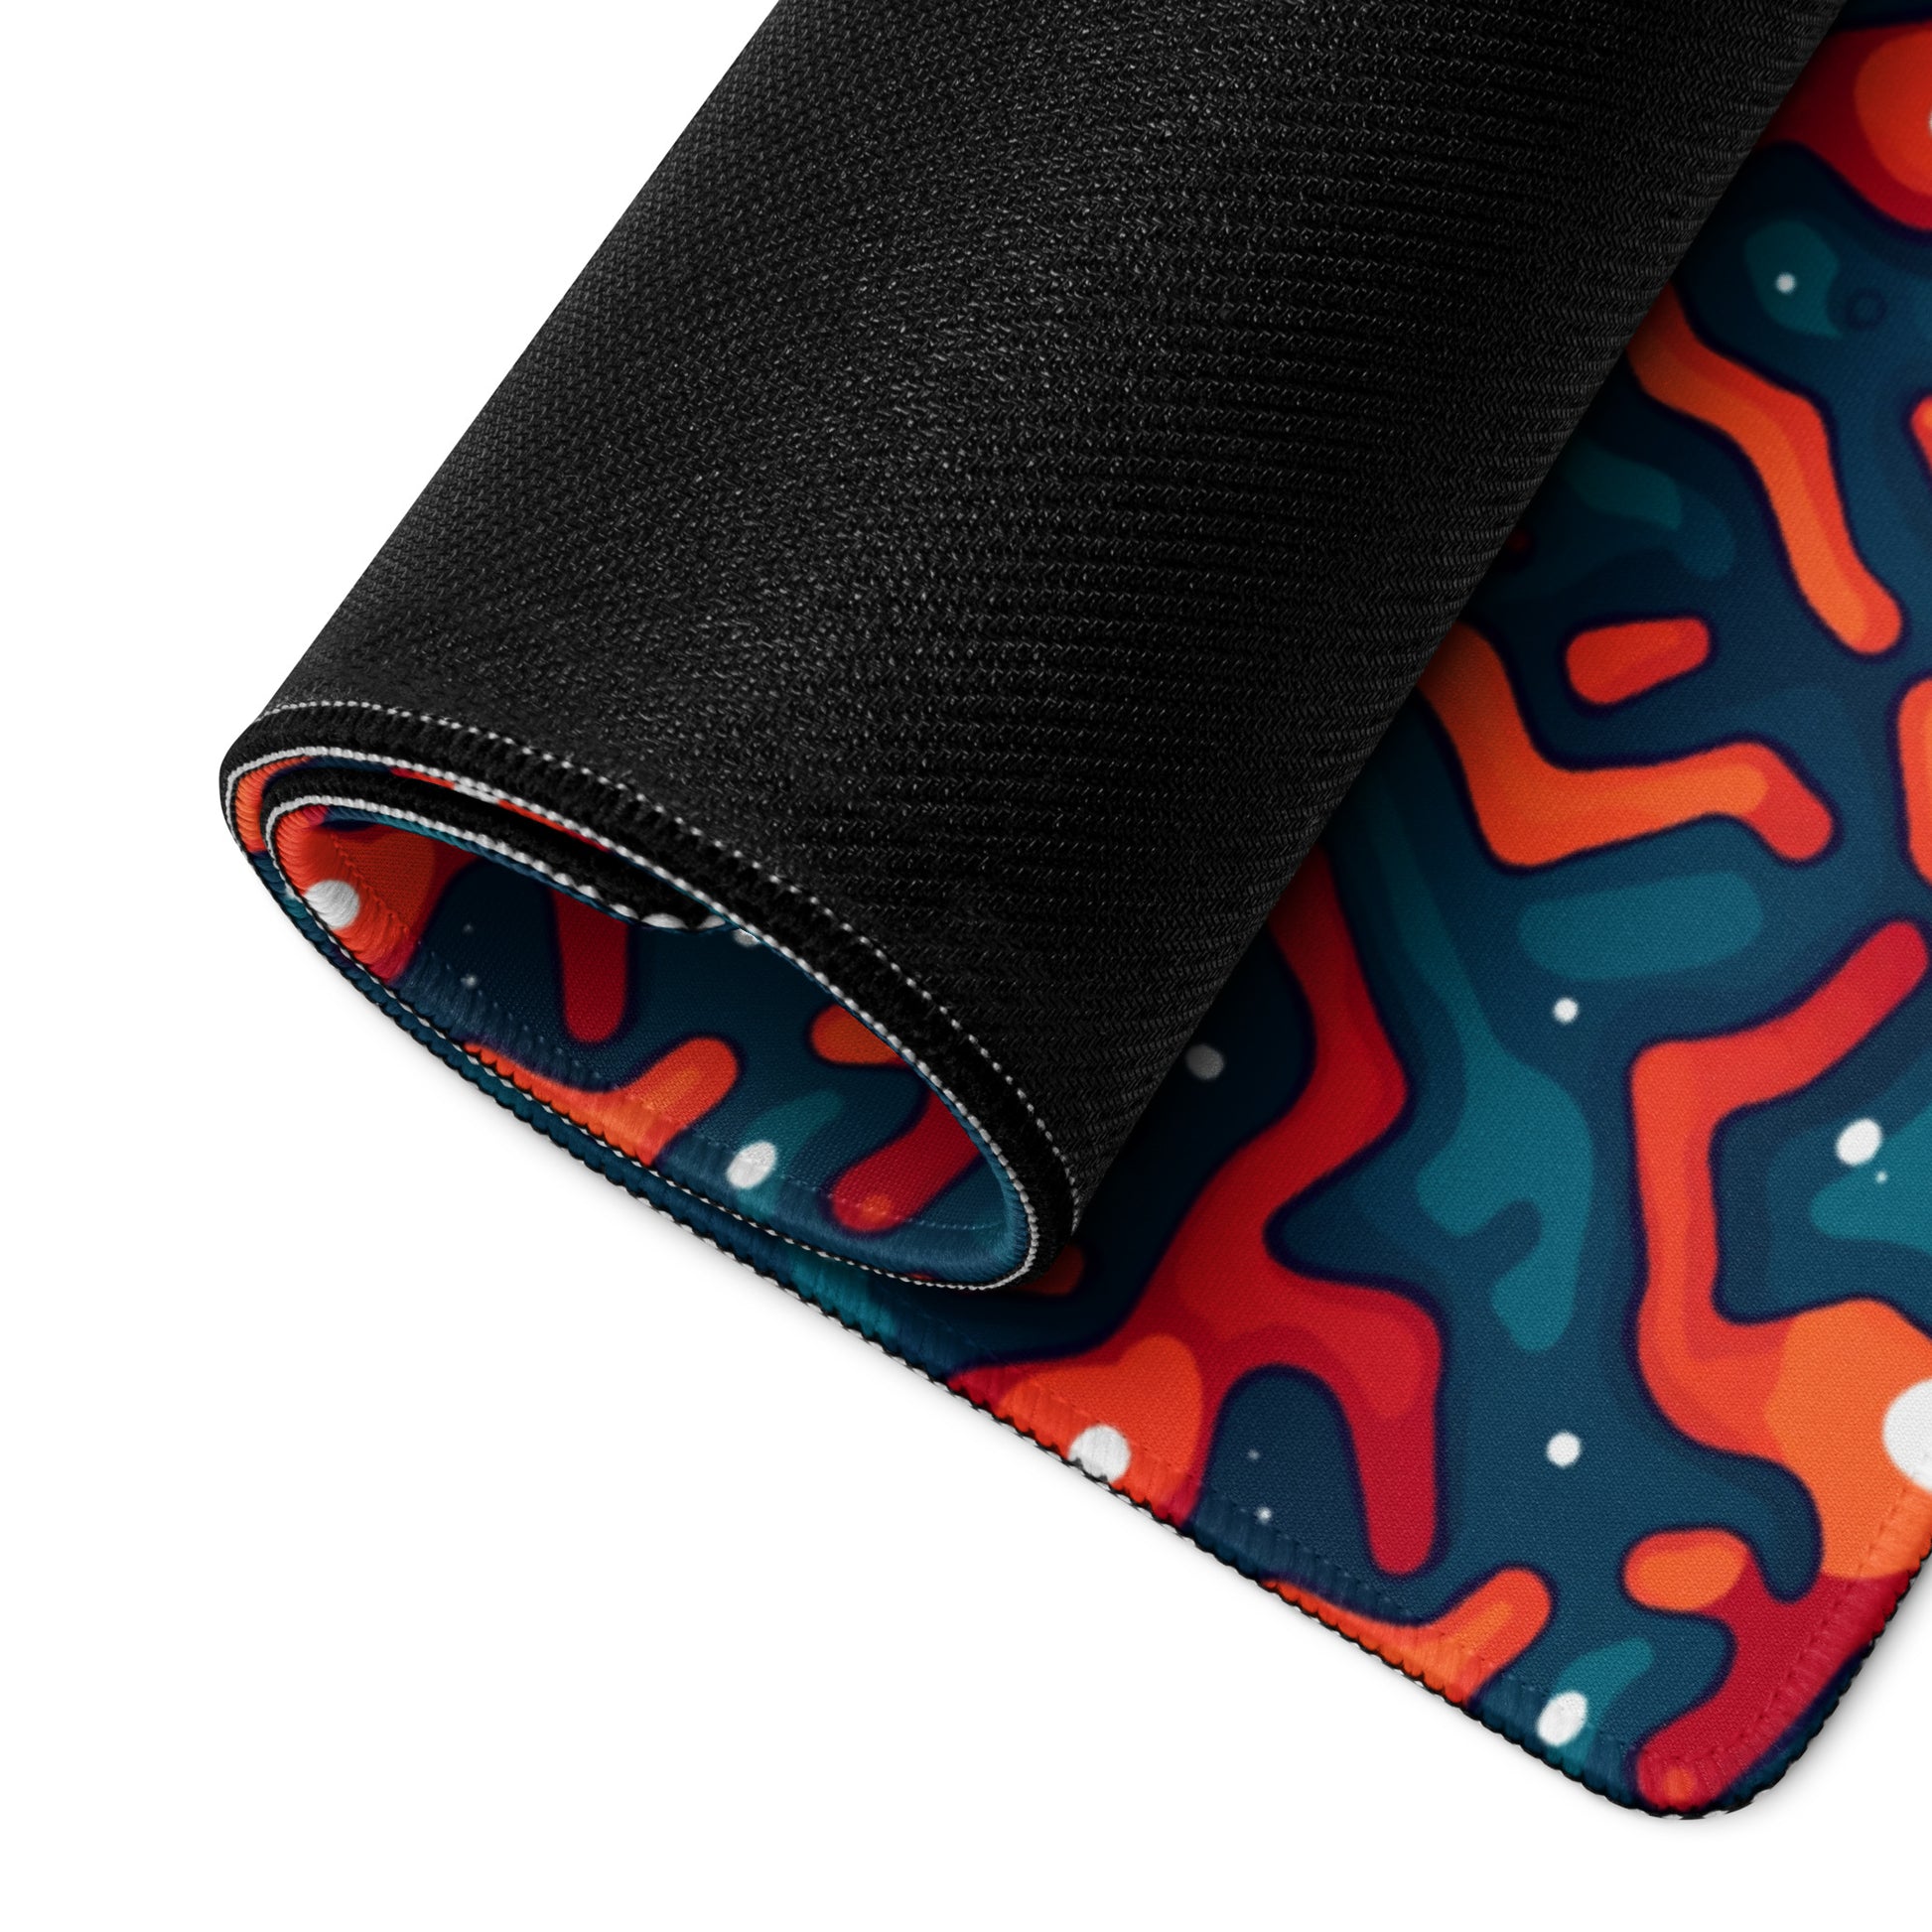 A 36" x 18" desk pad with a blue and orange crack pattern rolled up.